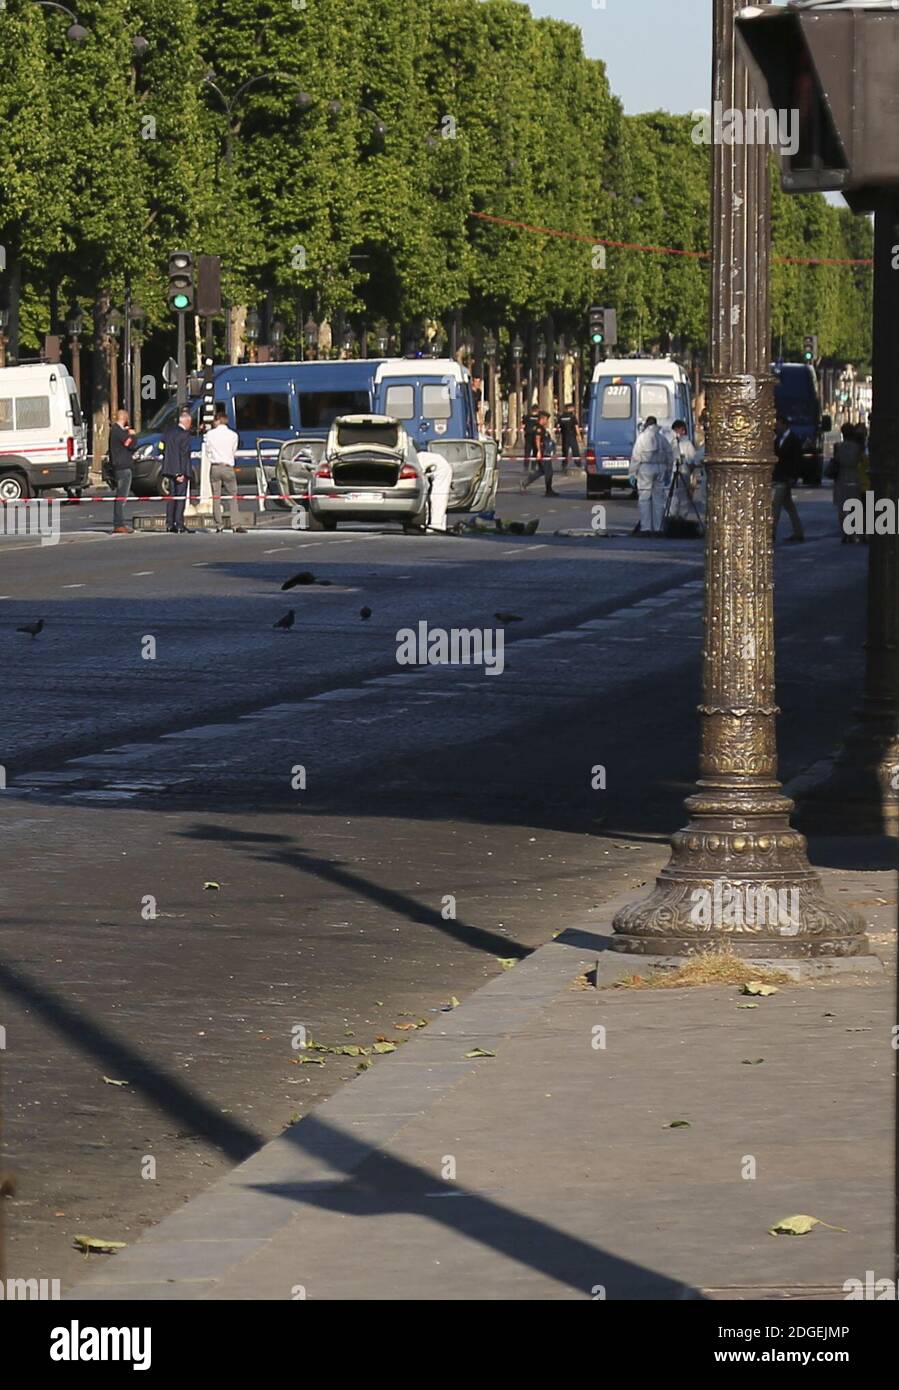 Police officers patrol near the Champs-Elysees avenue on June 19, 2017 in  Paris, France. A car rammed into a police van Monday on the Champs-Elysees  avenue in Paris before bursting into flames,